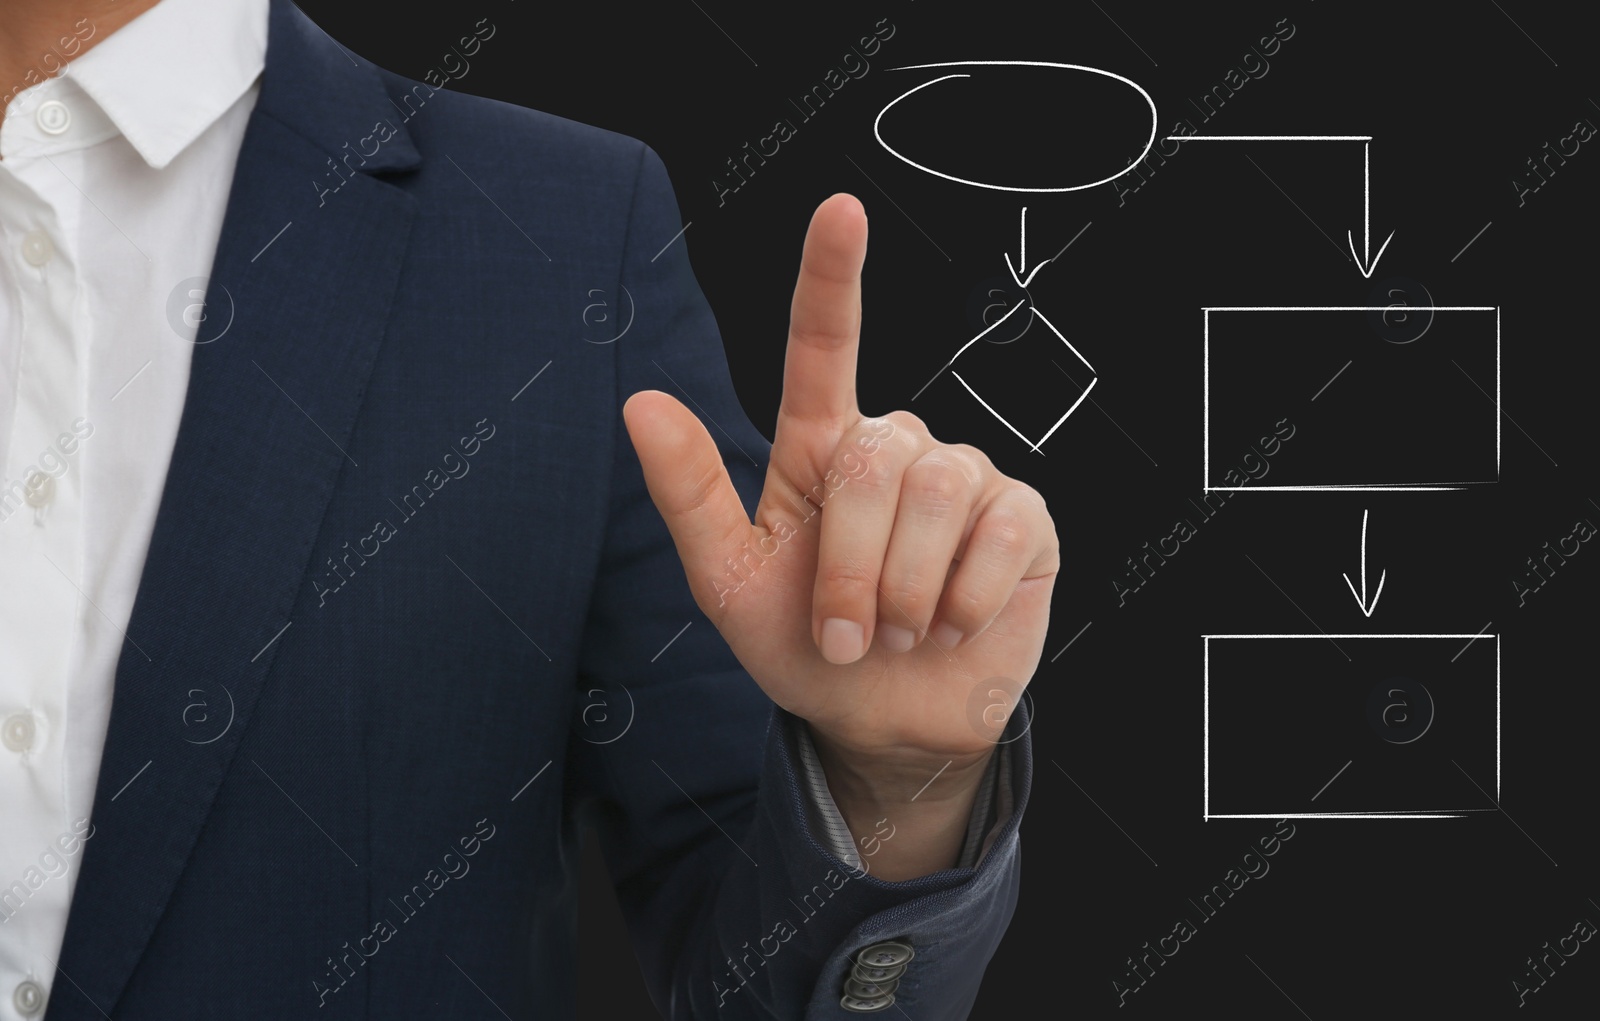 Image of Man pointing at flowchart on virtual screen against black background, closeup. Business process